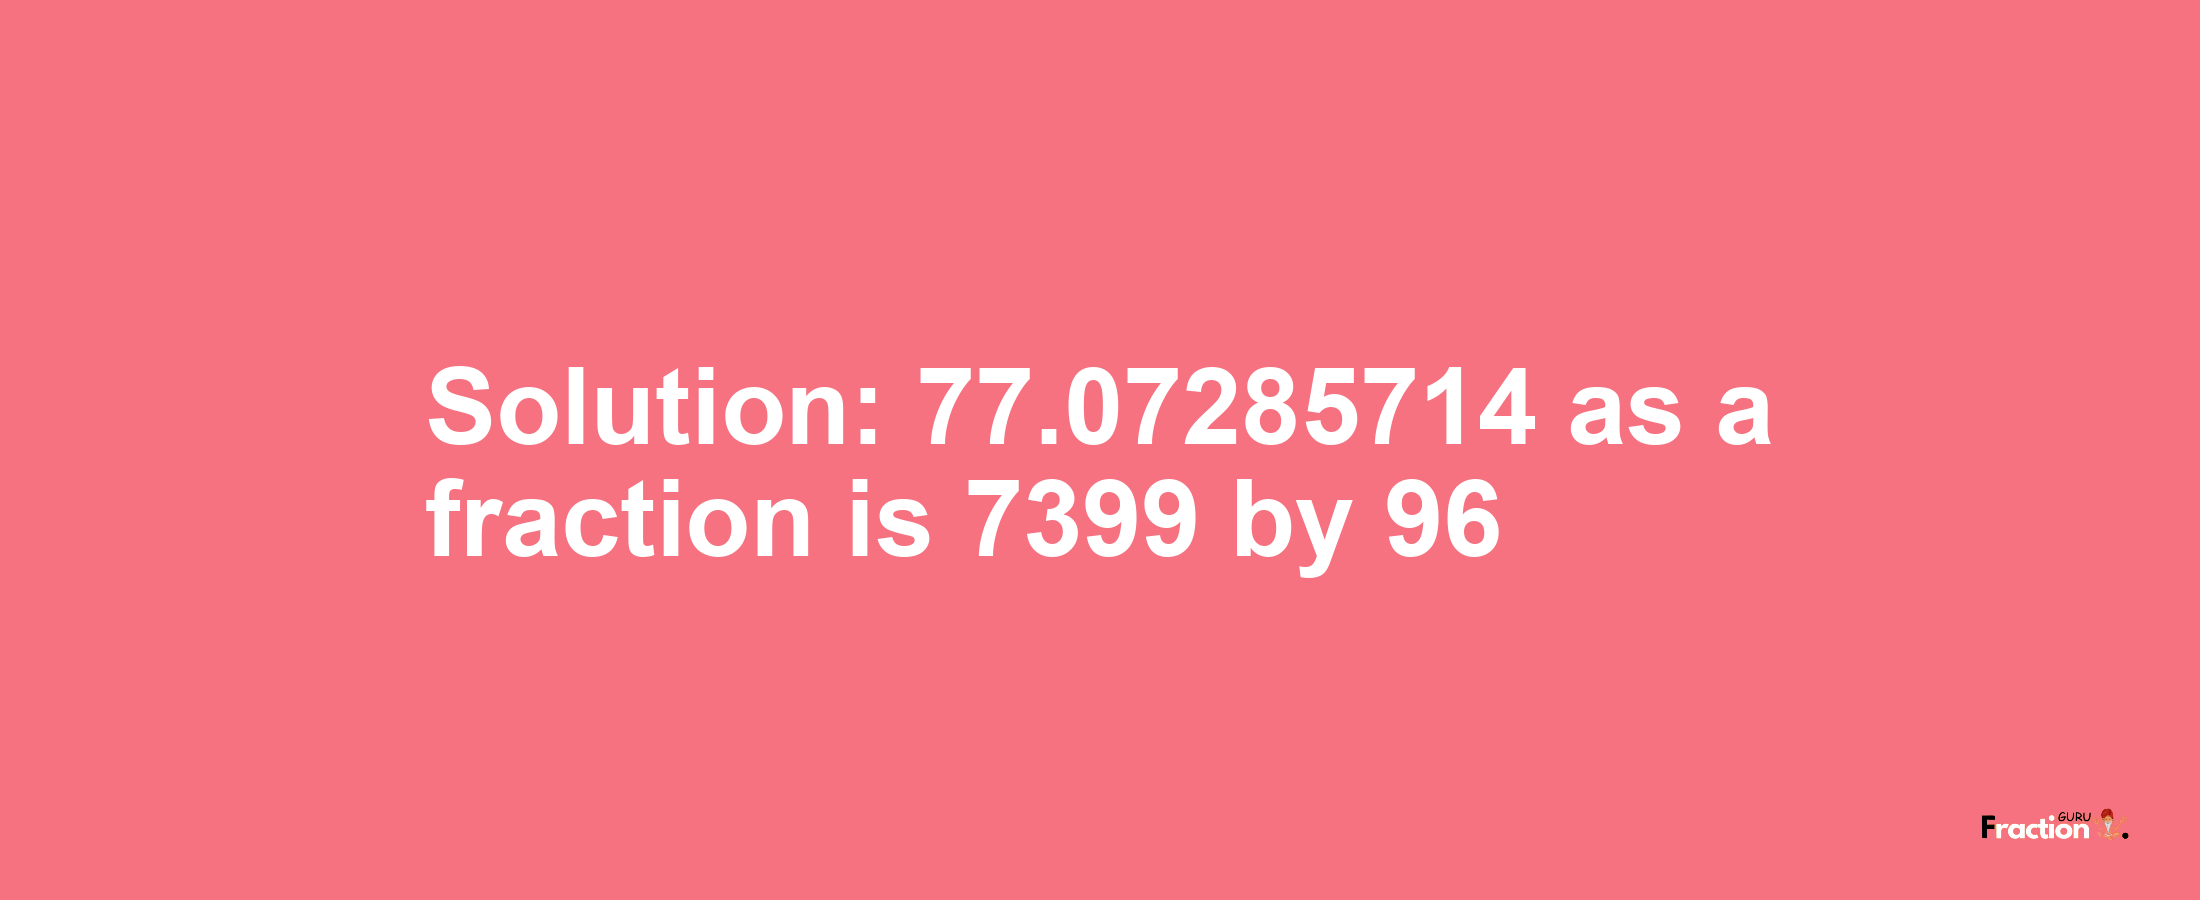 Solution:77.07285714 as a fraction is 7399/96